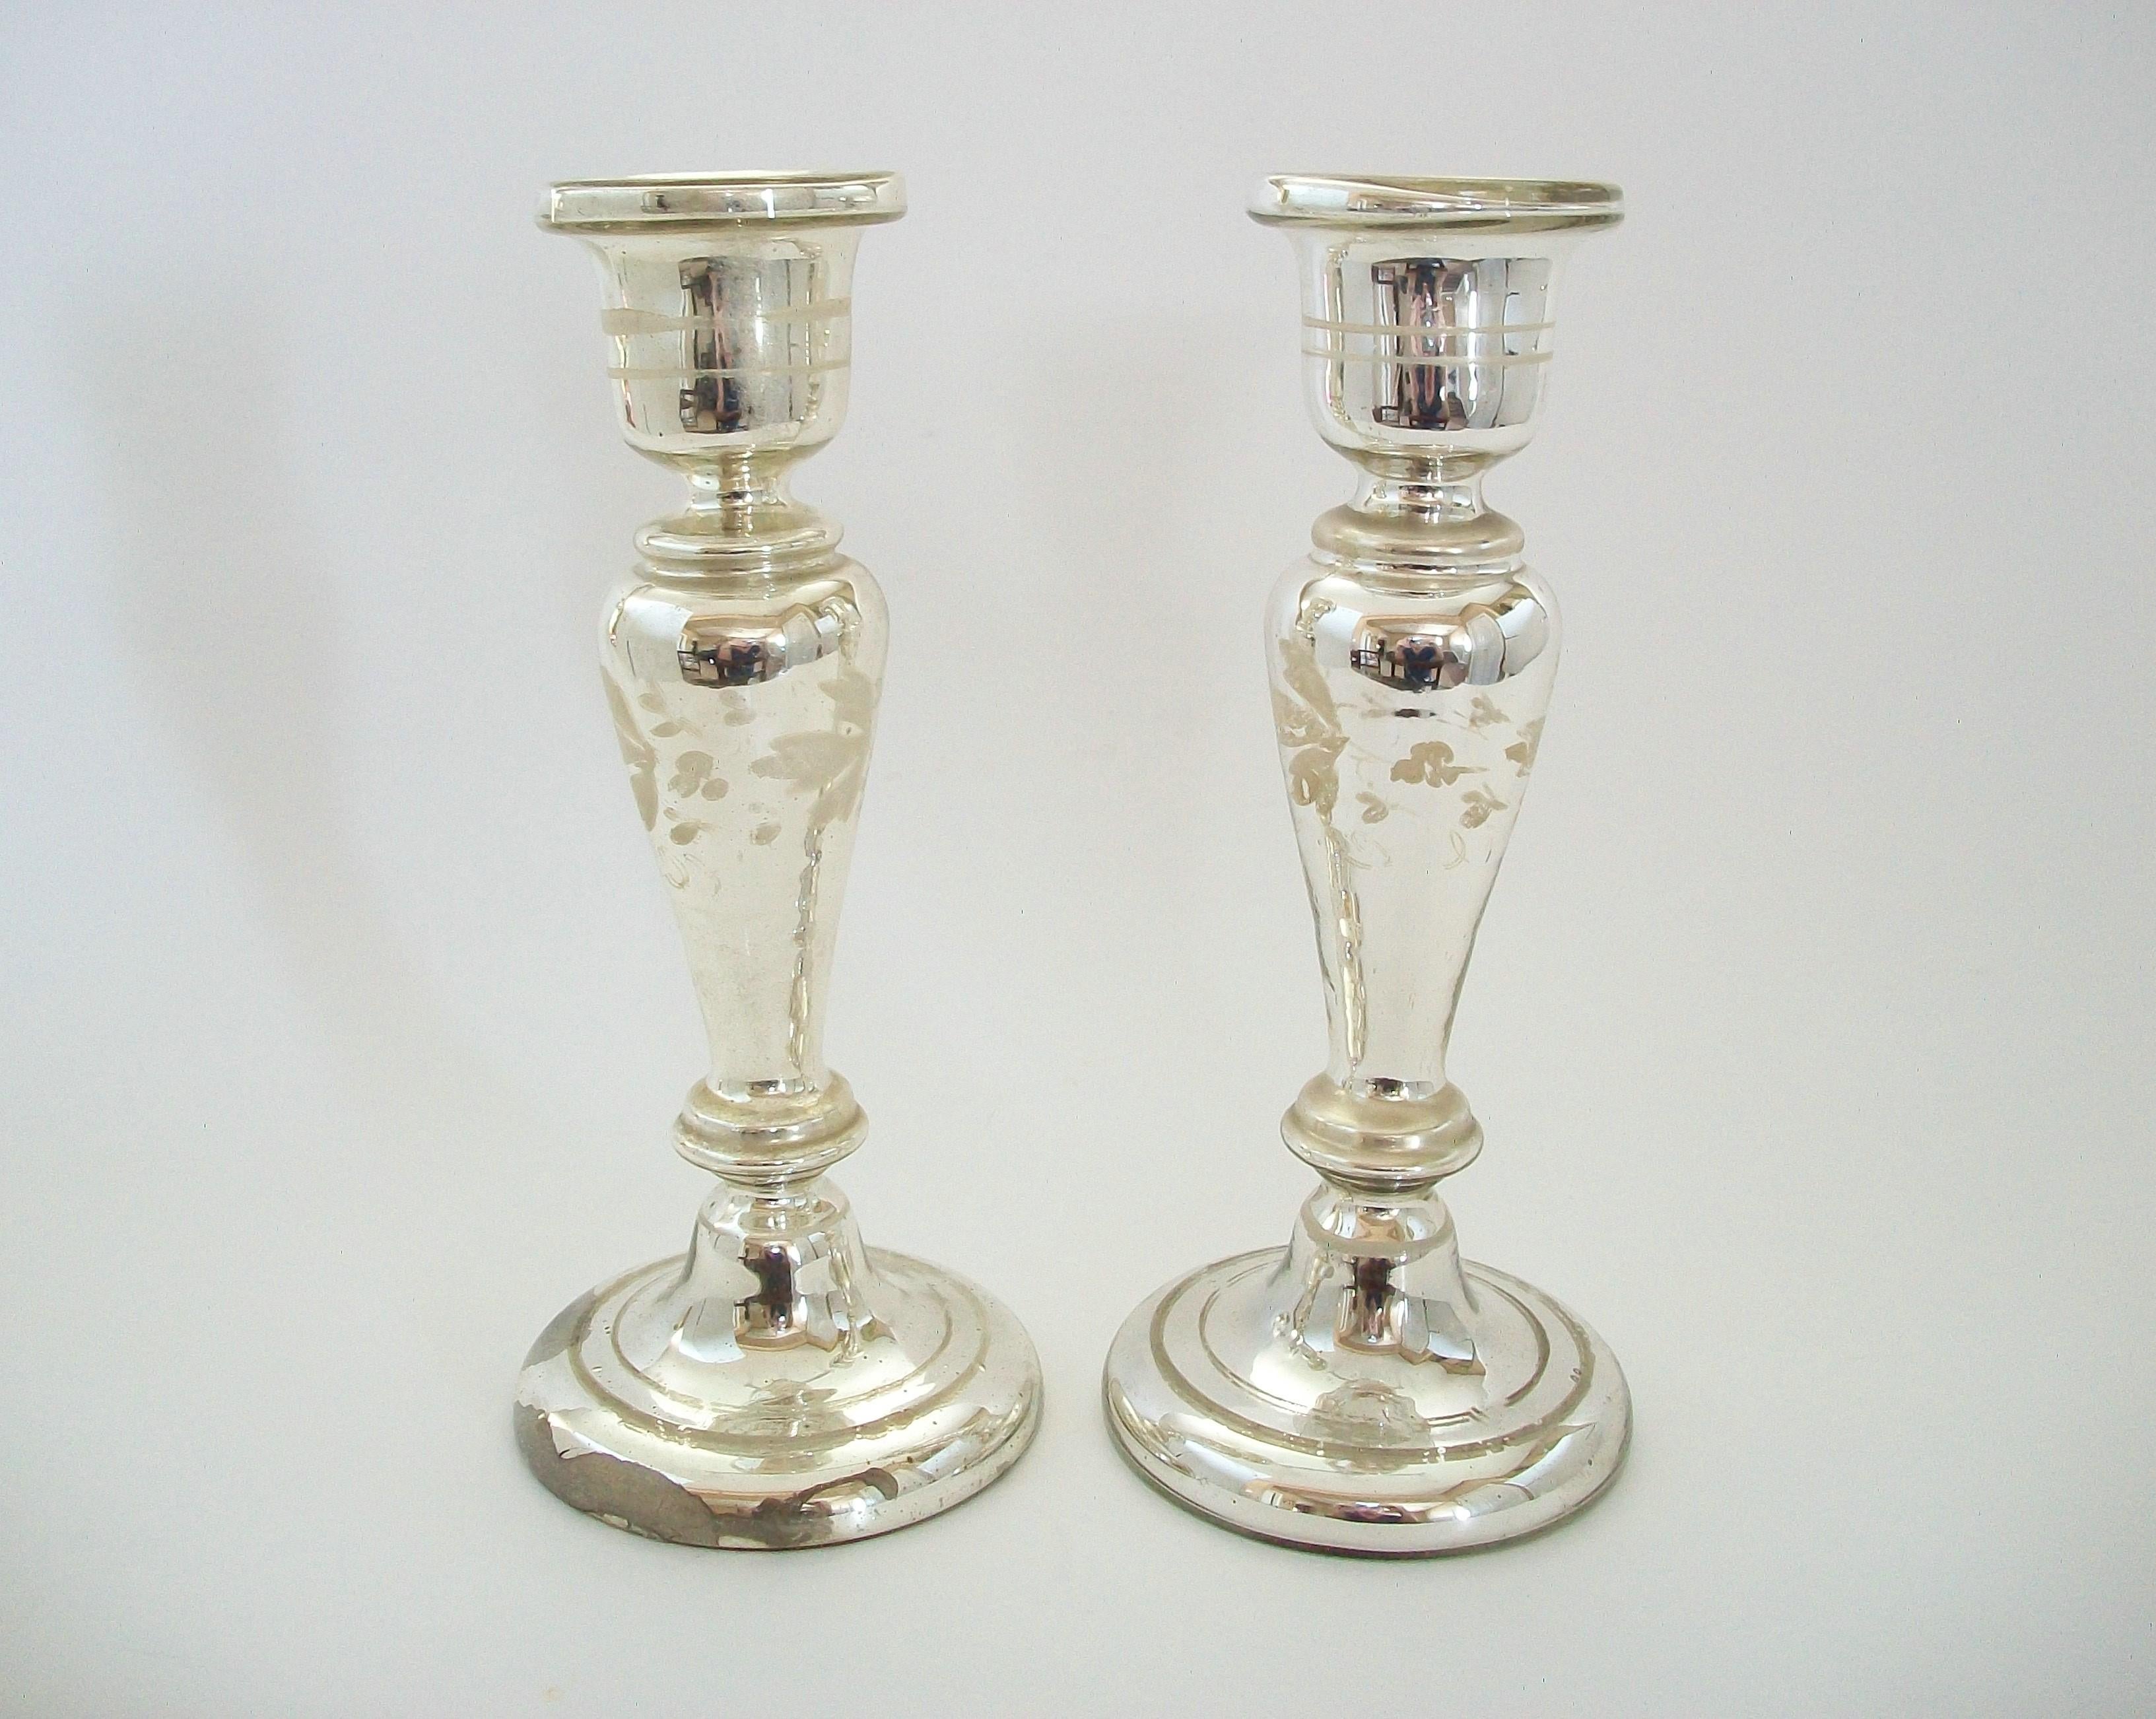 Hand-Crafted Antique Pair of White Painted Mercury Glass Candlesticks - France - Circa 1880 For Sale